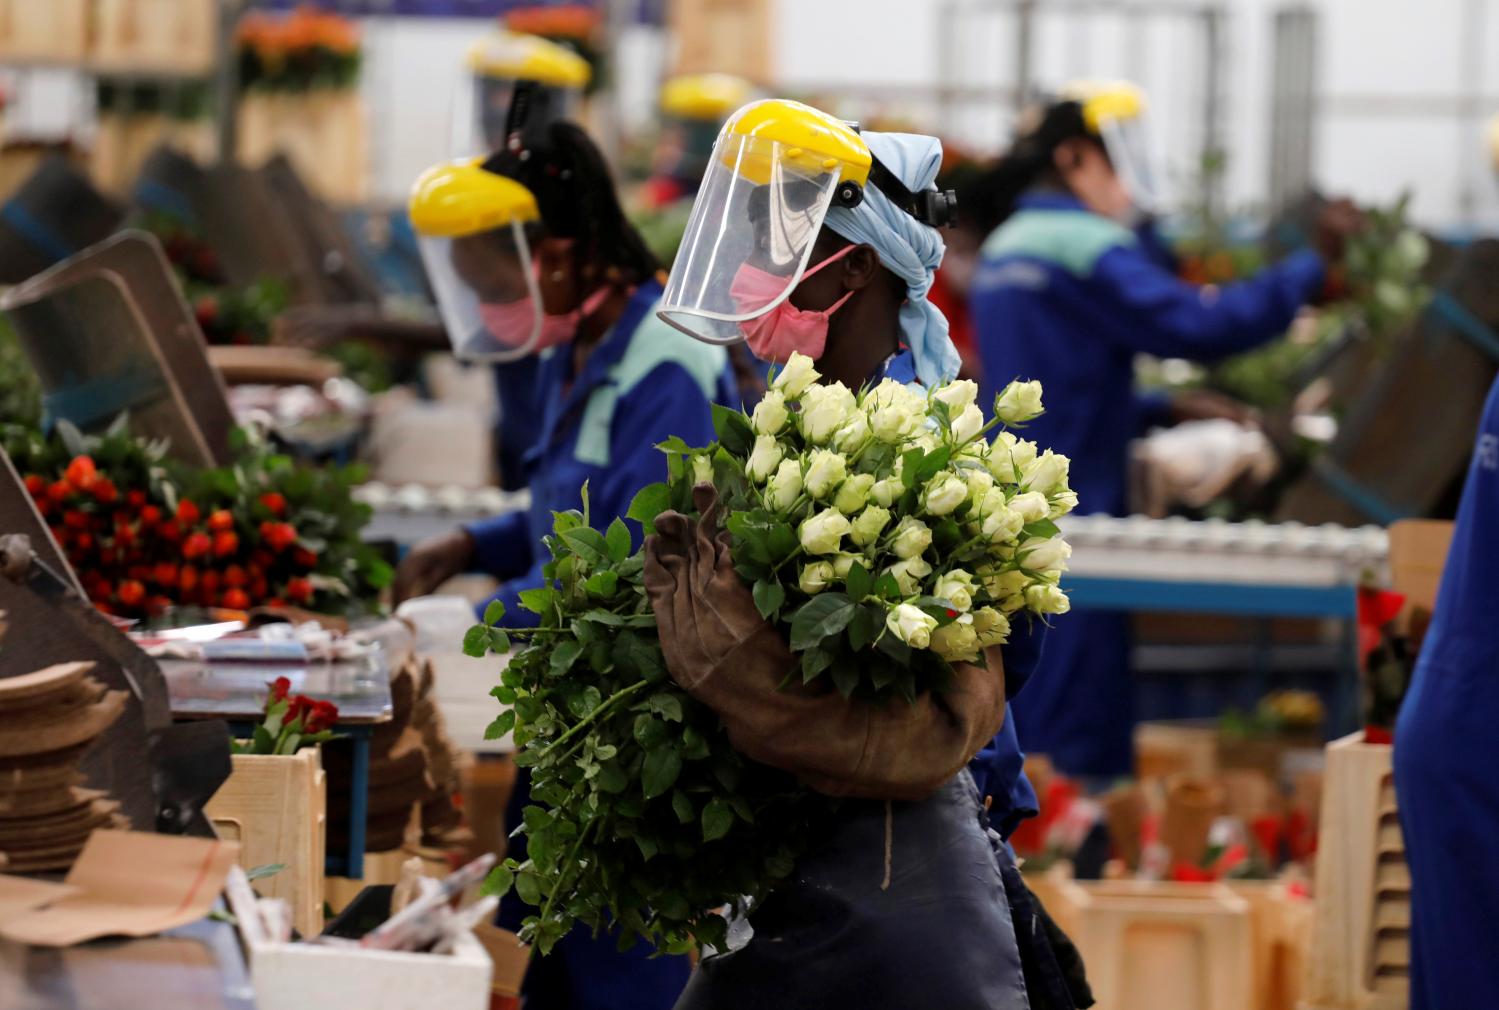 A worker holds roses while wearing protective equipment to help fight against the spread of the coronavirus disease (COVID-19) on the packing line at the Maridadi flower farm in Naivasha, Kenya, July 20, 2020. Picture taken July 20, 2020. REUTERS/Baz Ratner